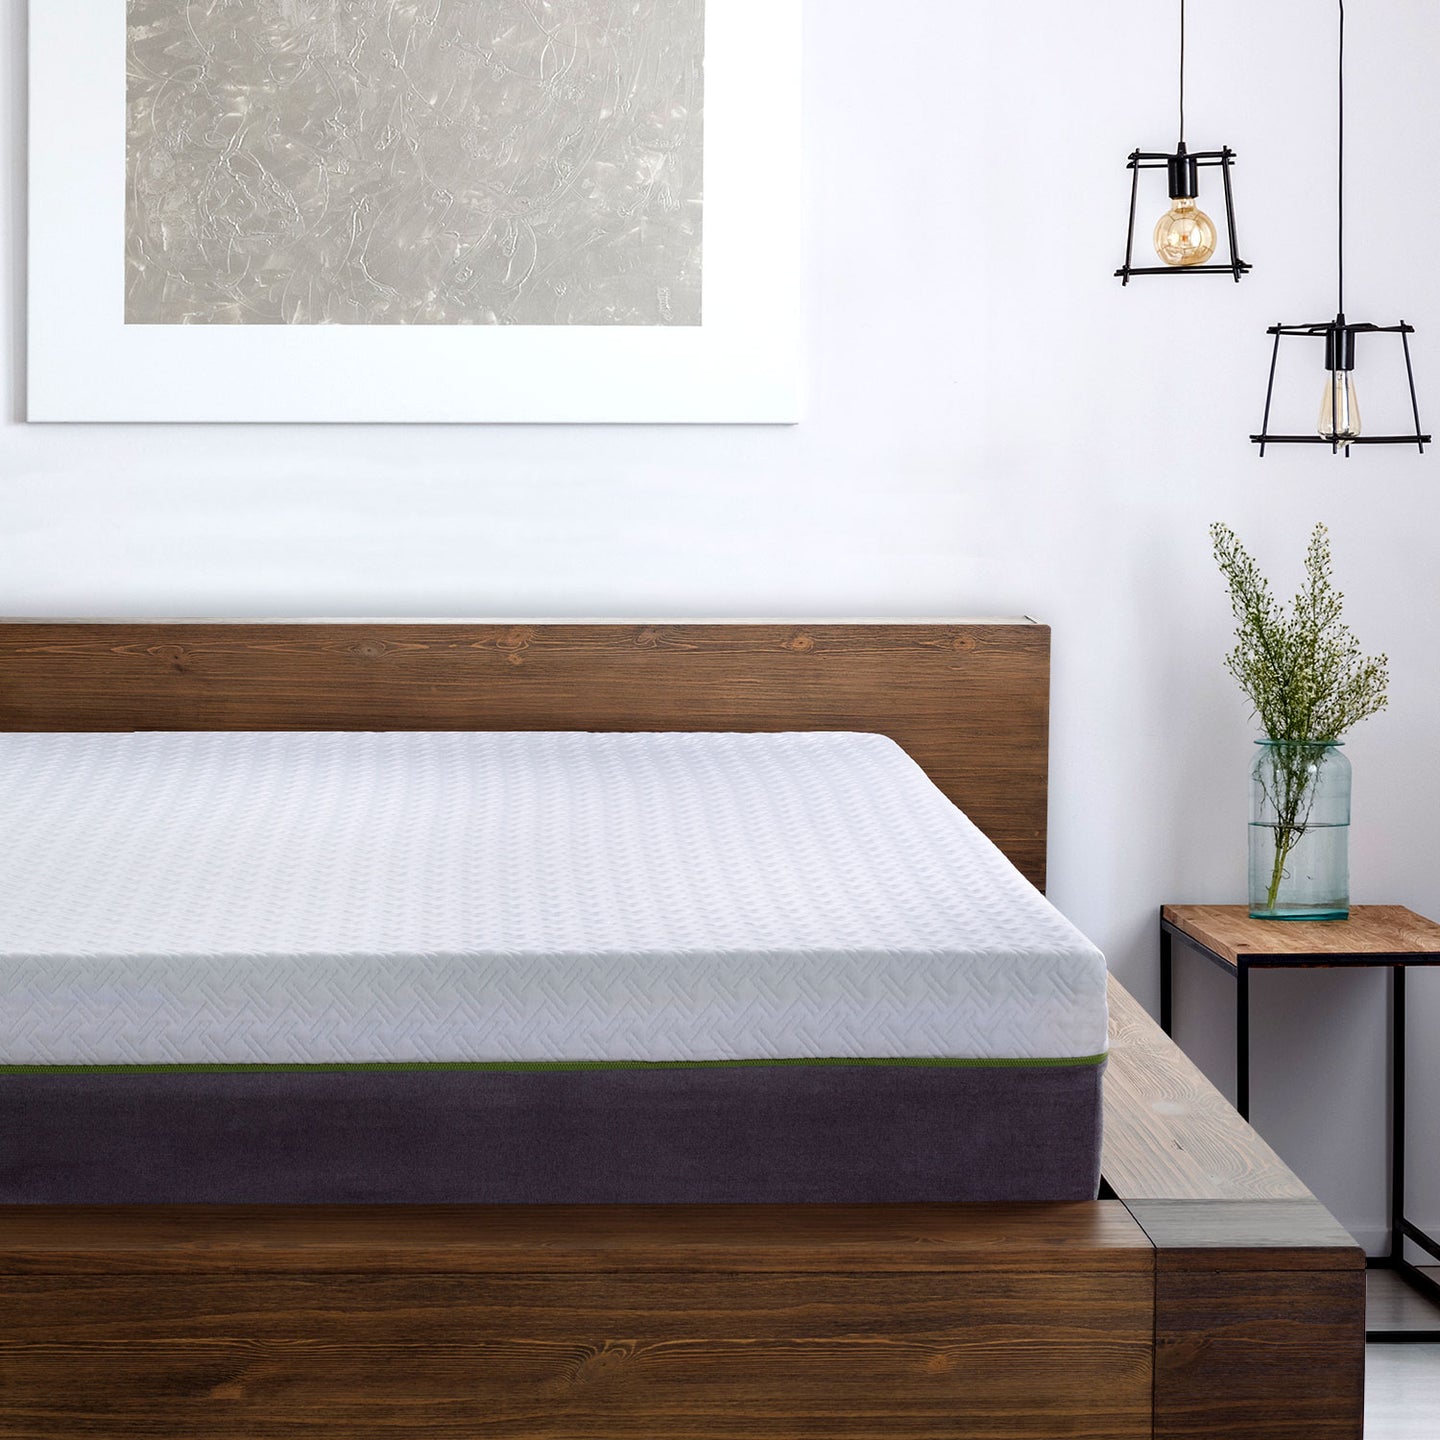 Medium Firm - Copper Infused Cool Memory Foam Mattress Developed for Adjustable Bed Bases